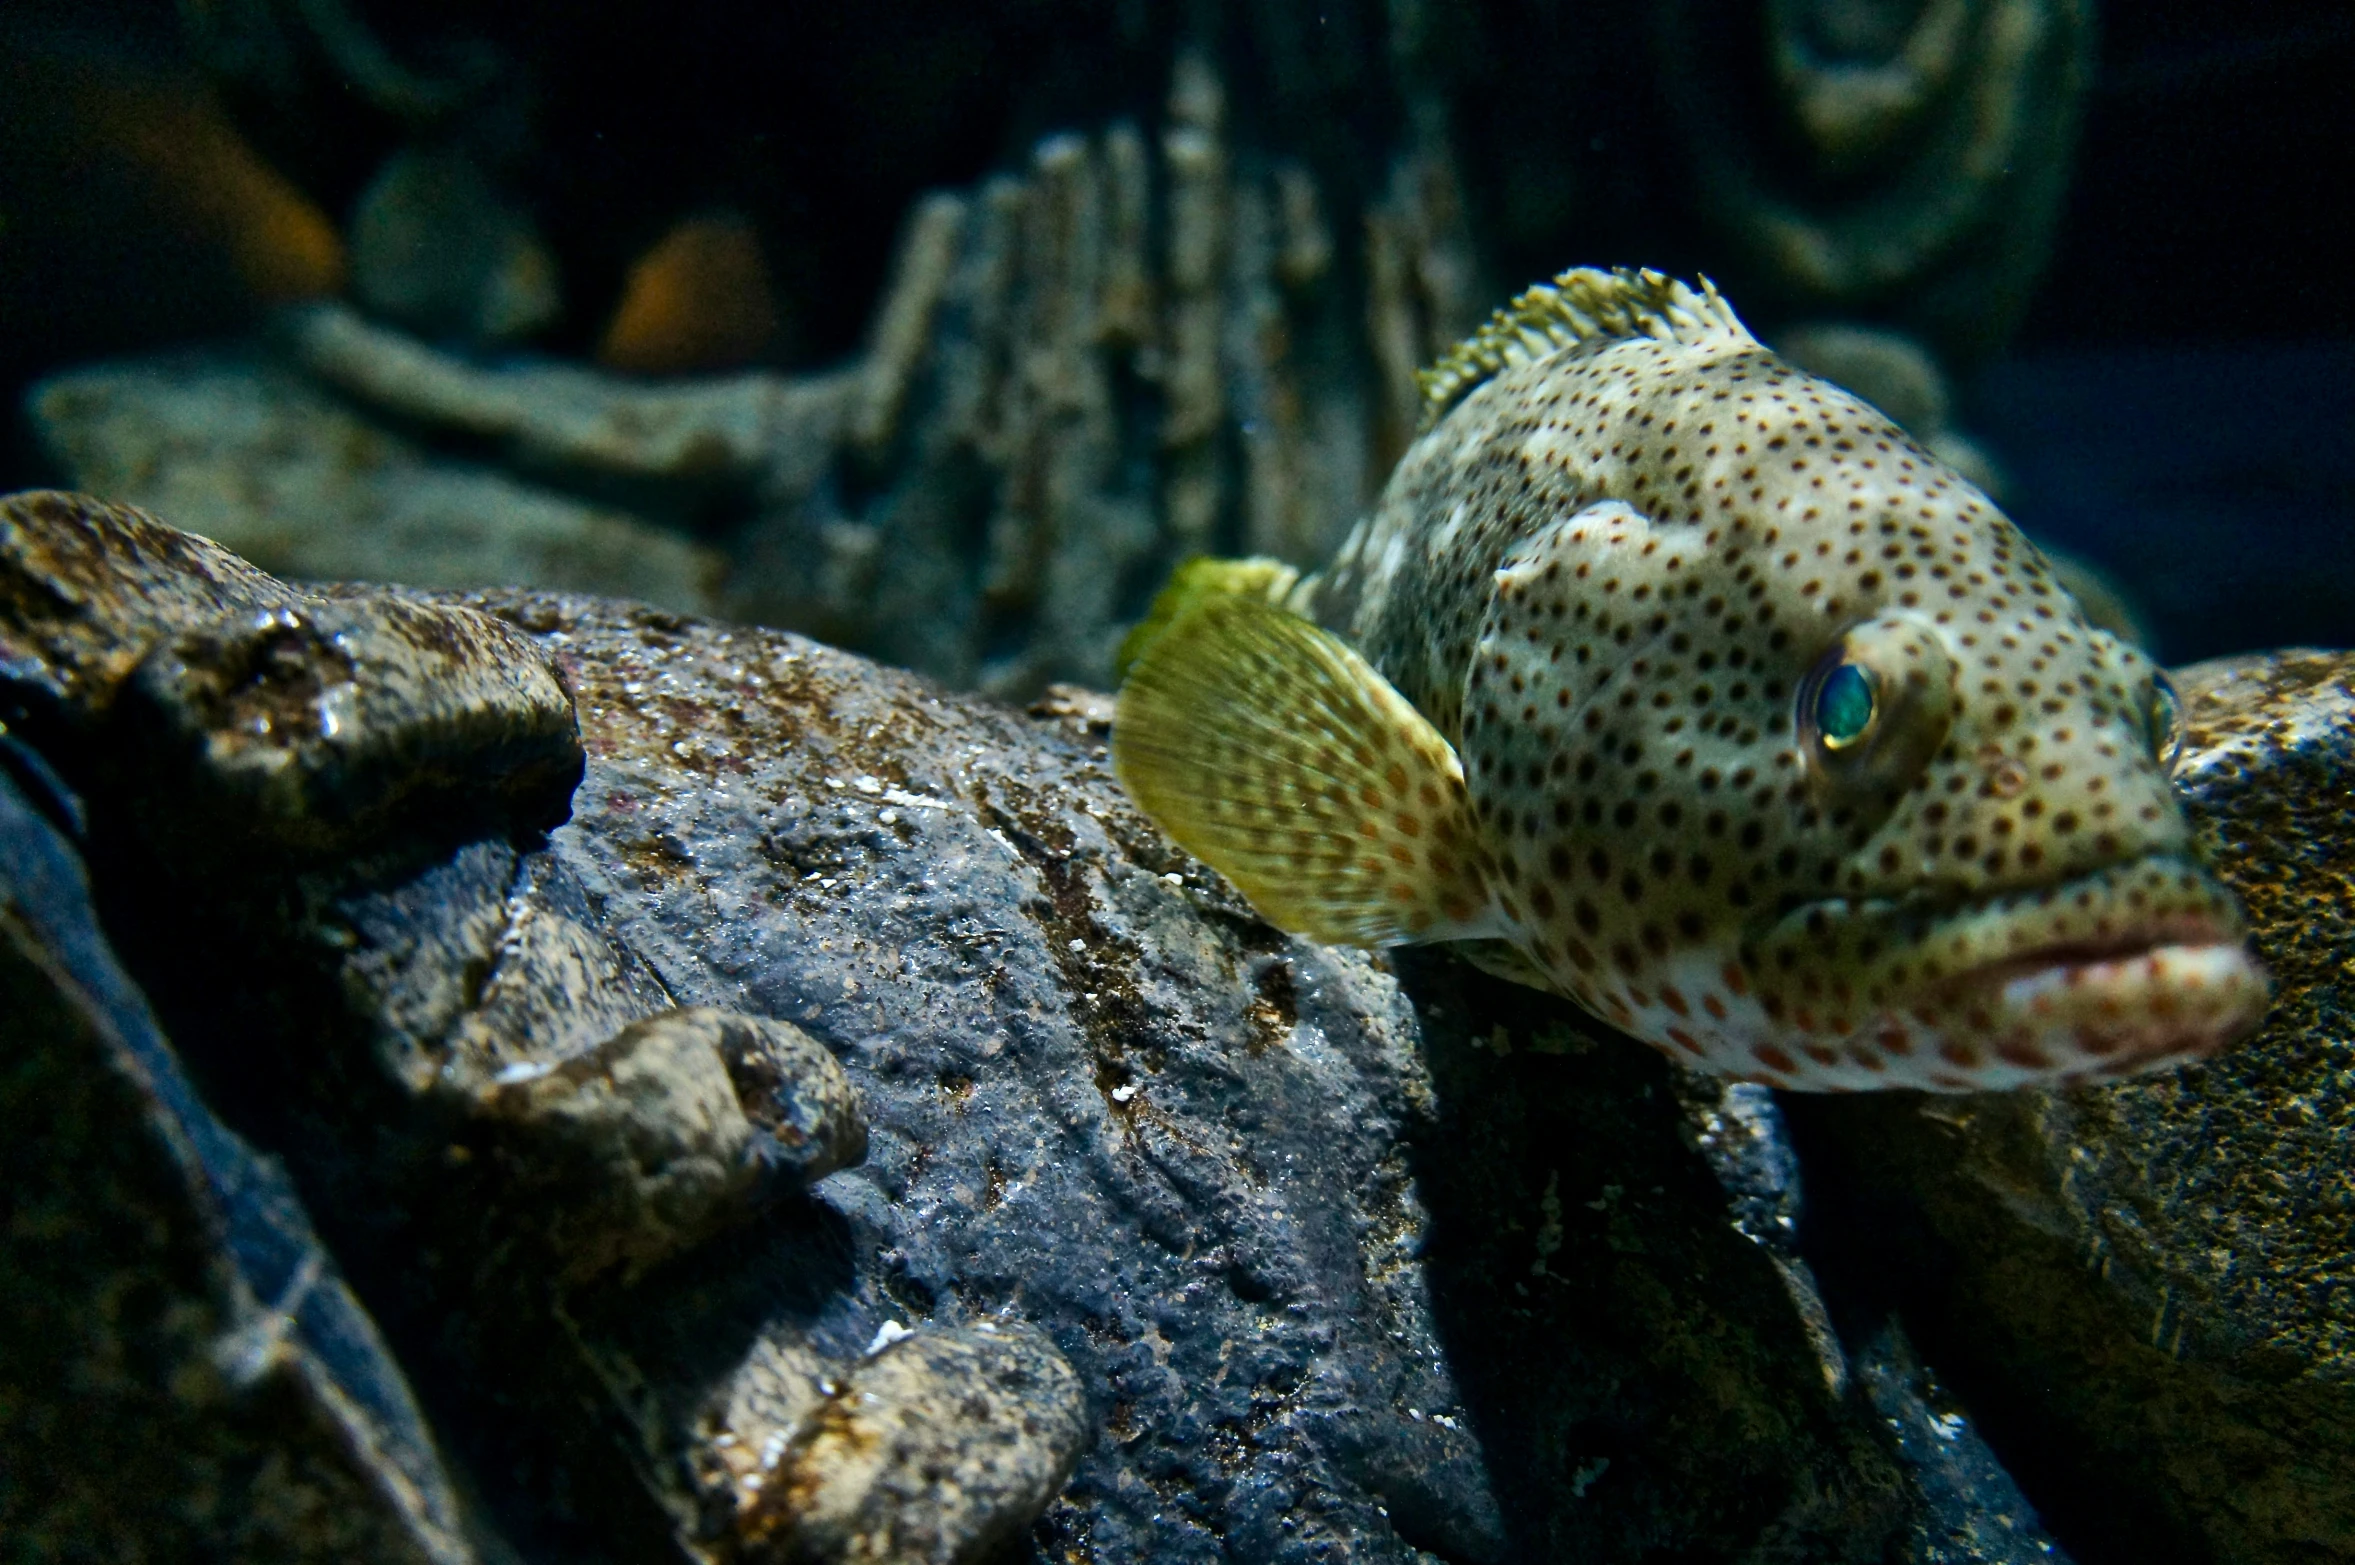 a yellow spotted fish standing by the rock